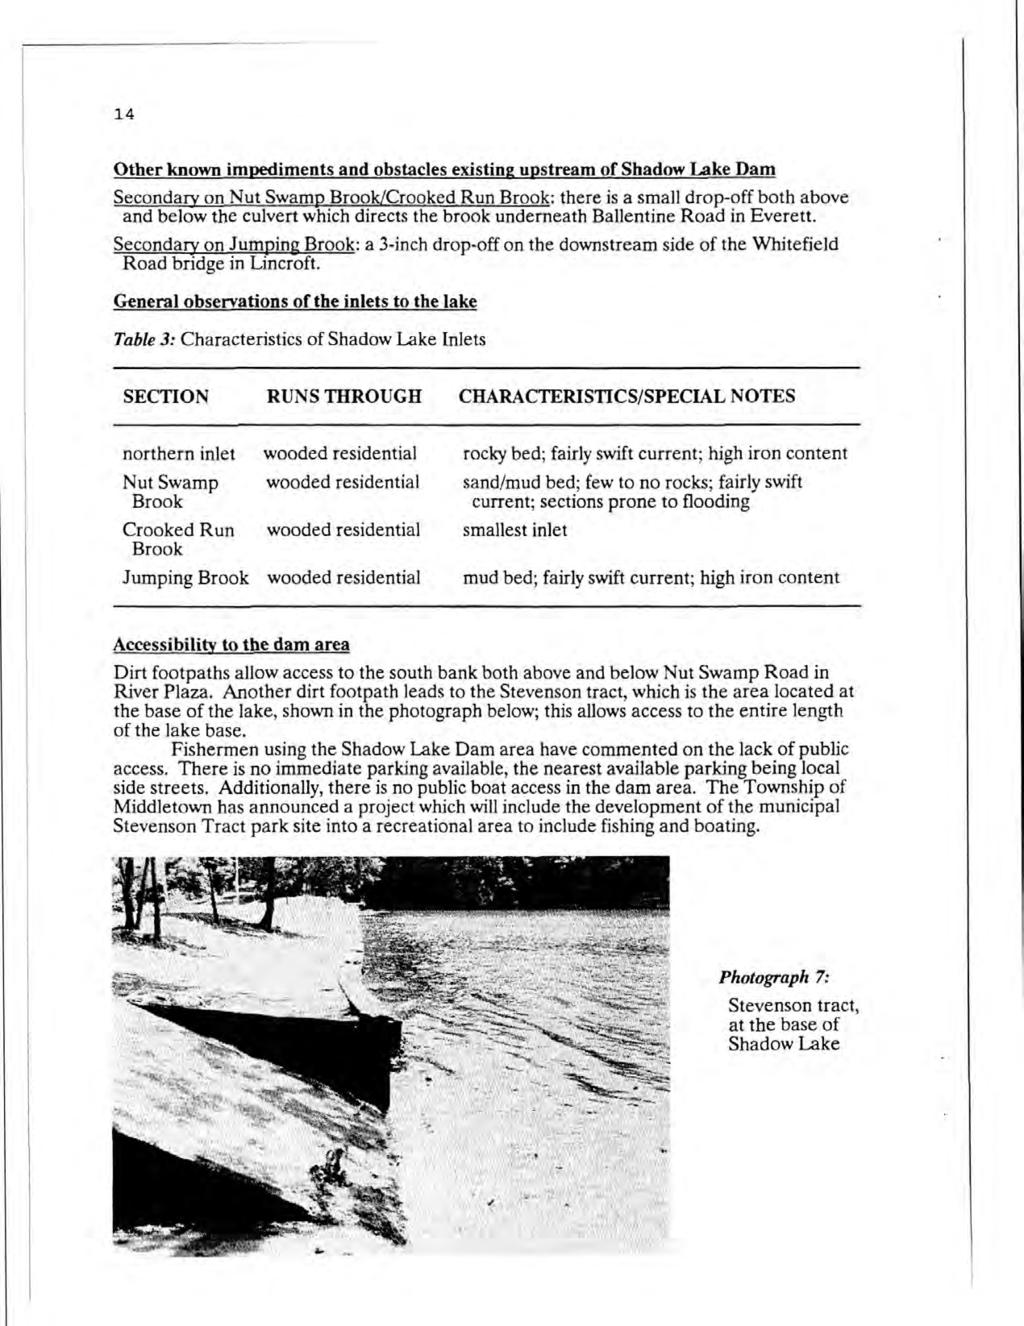 14 Other known impediments and obstacles existing upstream of Shadow Lake Dam Secondary on Nut Swamp Brook/Crooked Run Brook: there is a small drop-off both above and below the culvert which directs